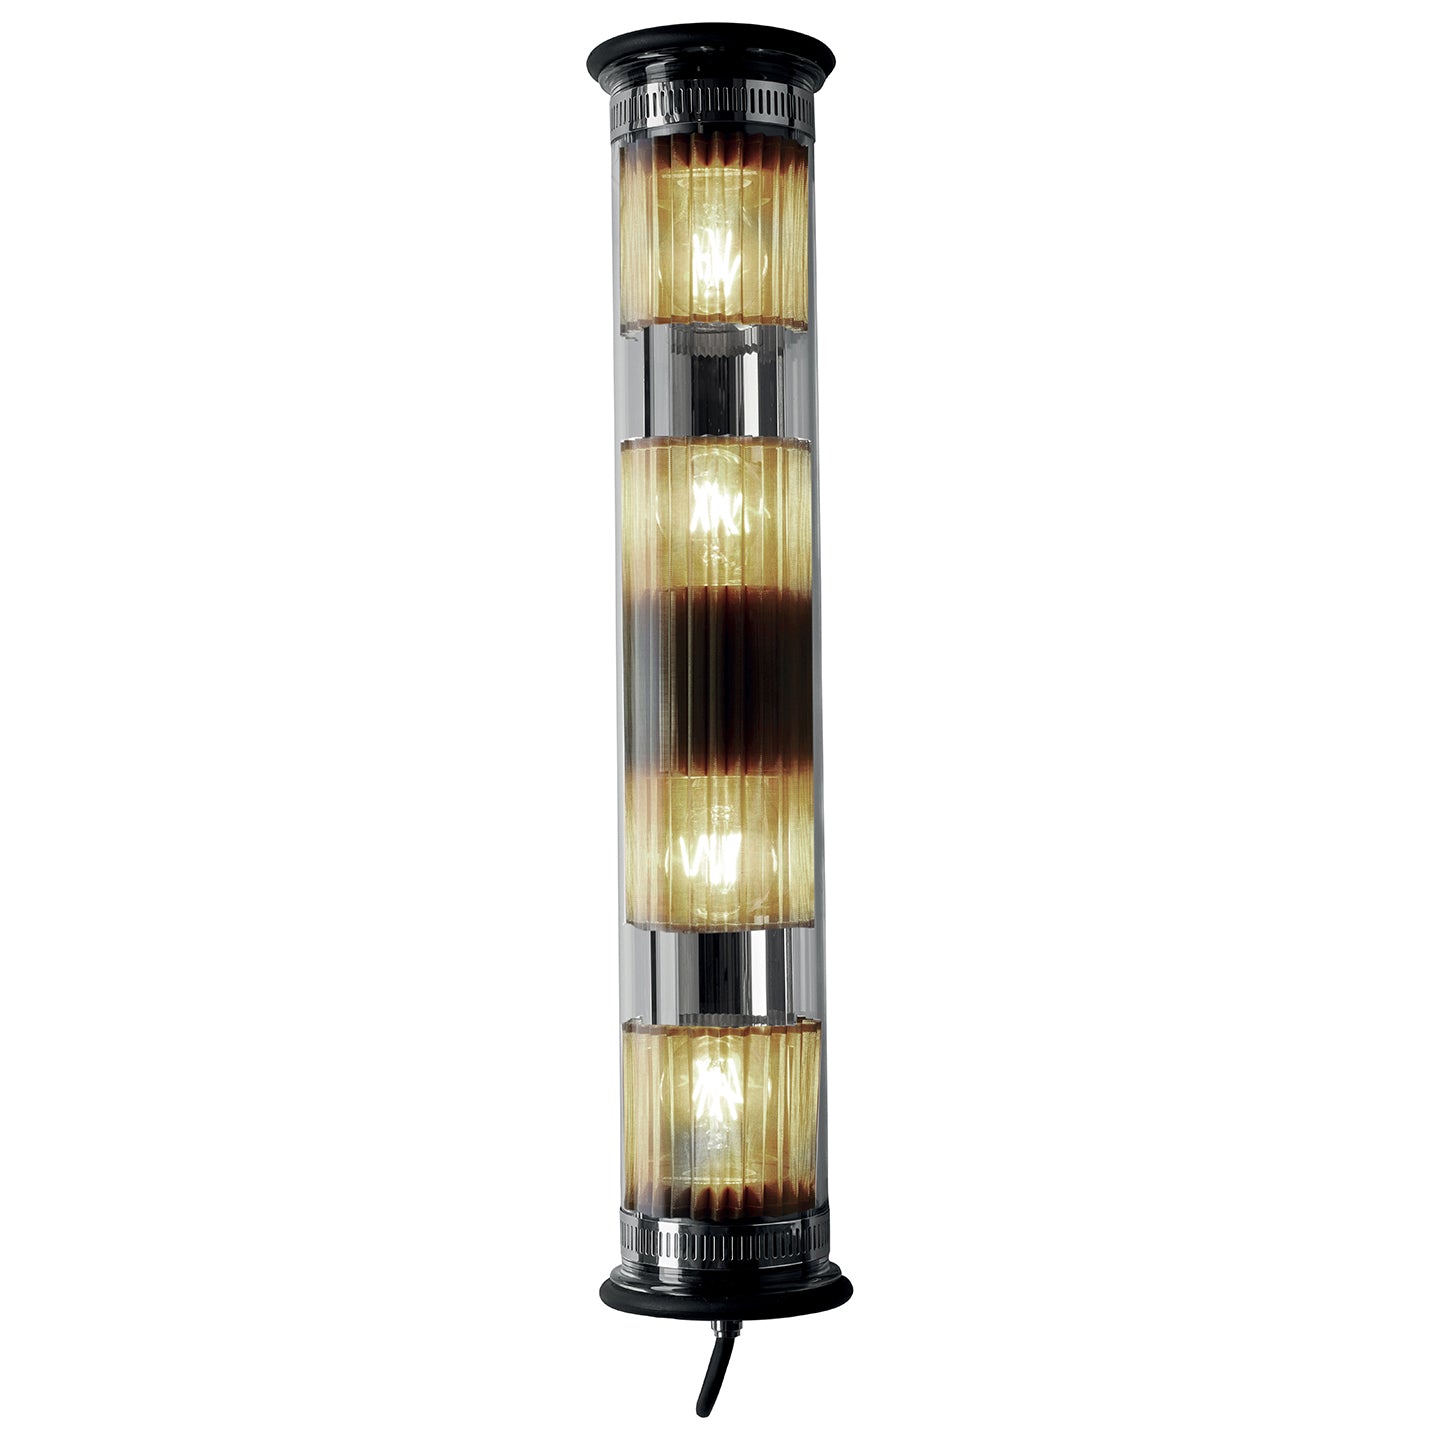 In The Tube Silver Wall Sconce - $1,266.00-$2,810.00